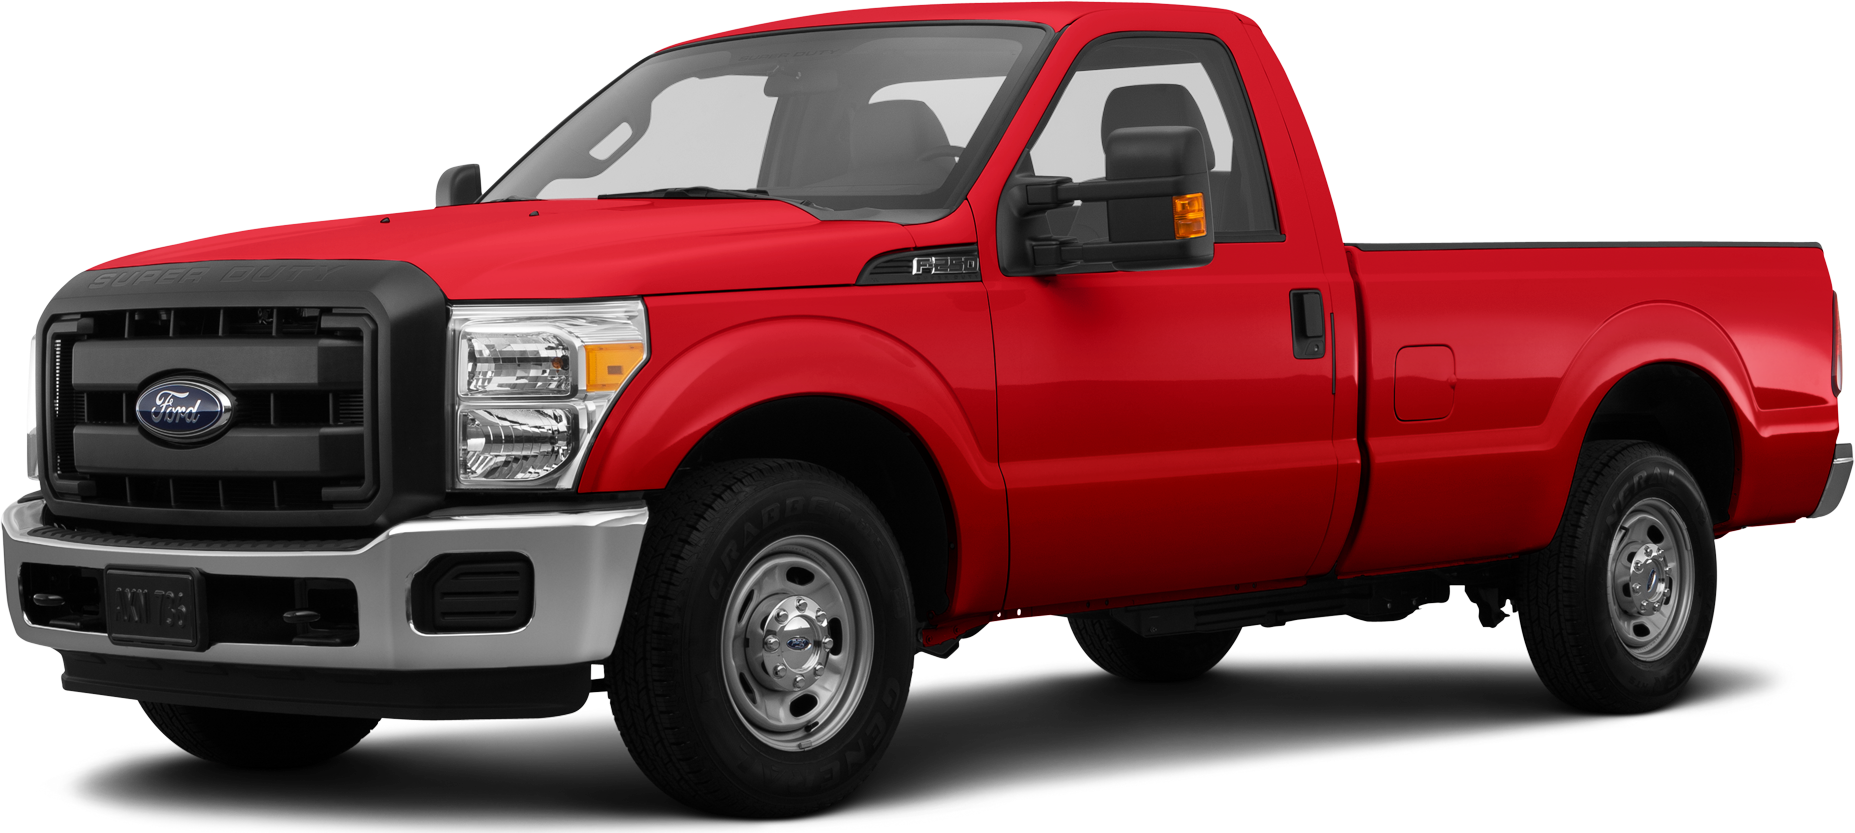 2015 Ford F250 Price Value Ratings And Reviews Kelley Blue Book